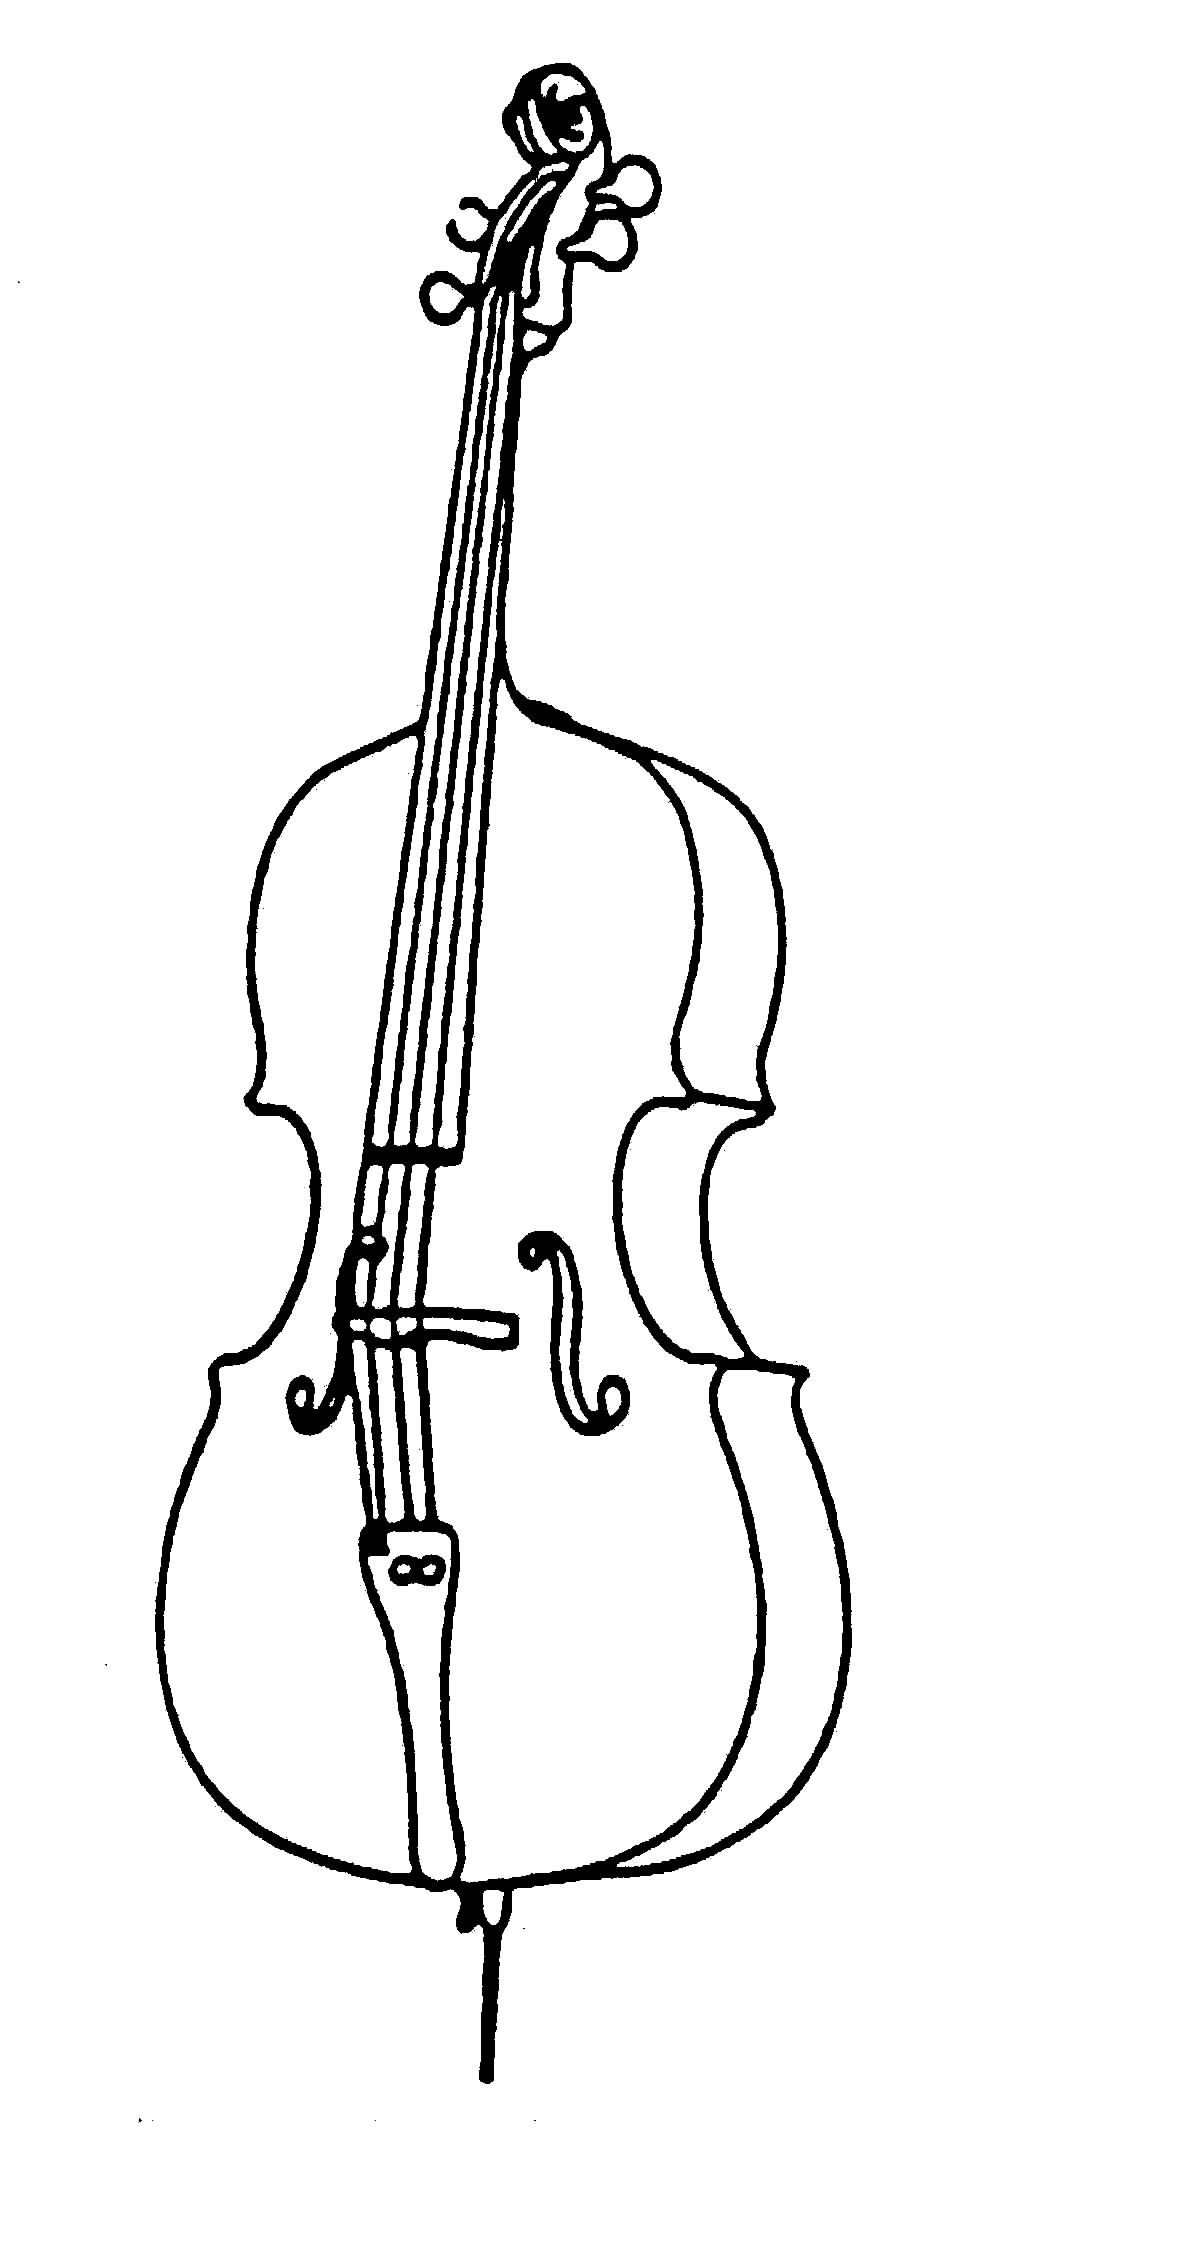 Cello Clipart Black And White | Clipart Panda - Free Clipart Images